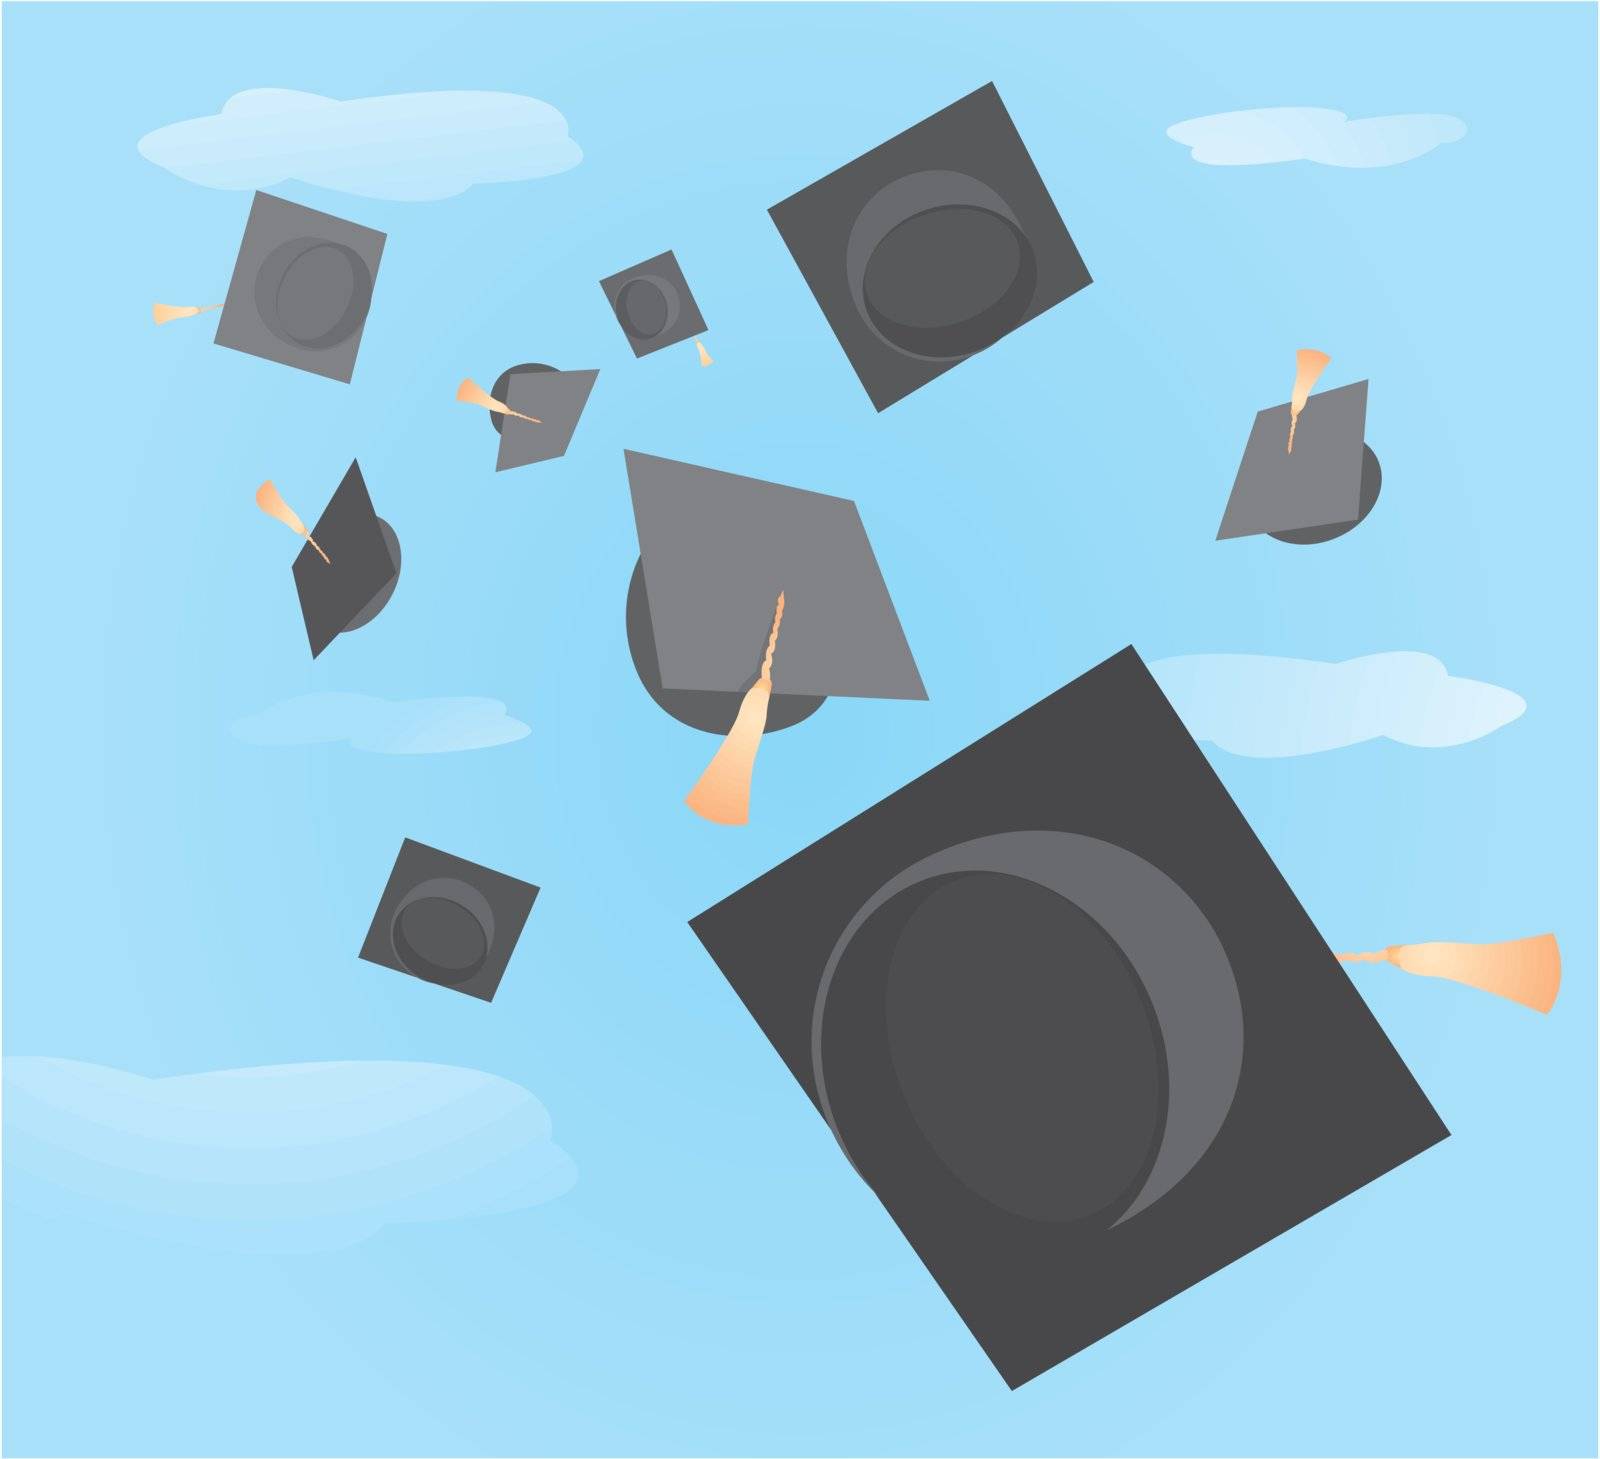 Graduation caps tossed up by curvabezier